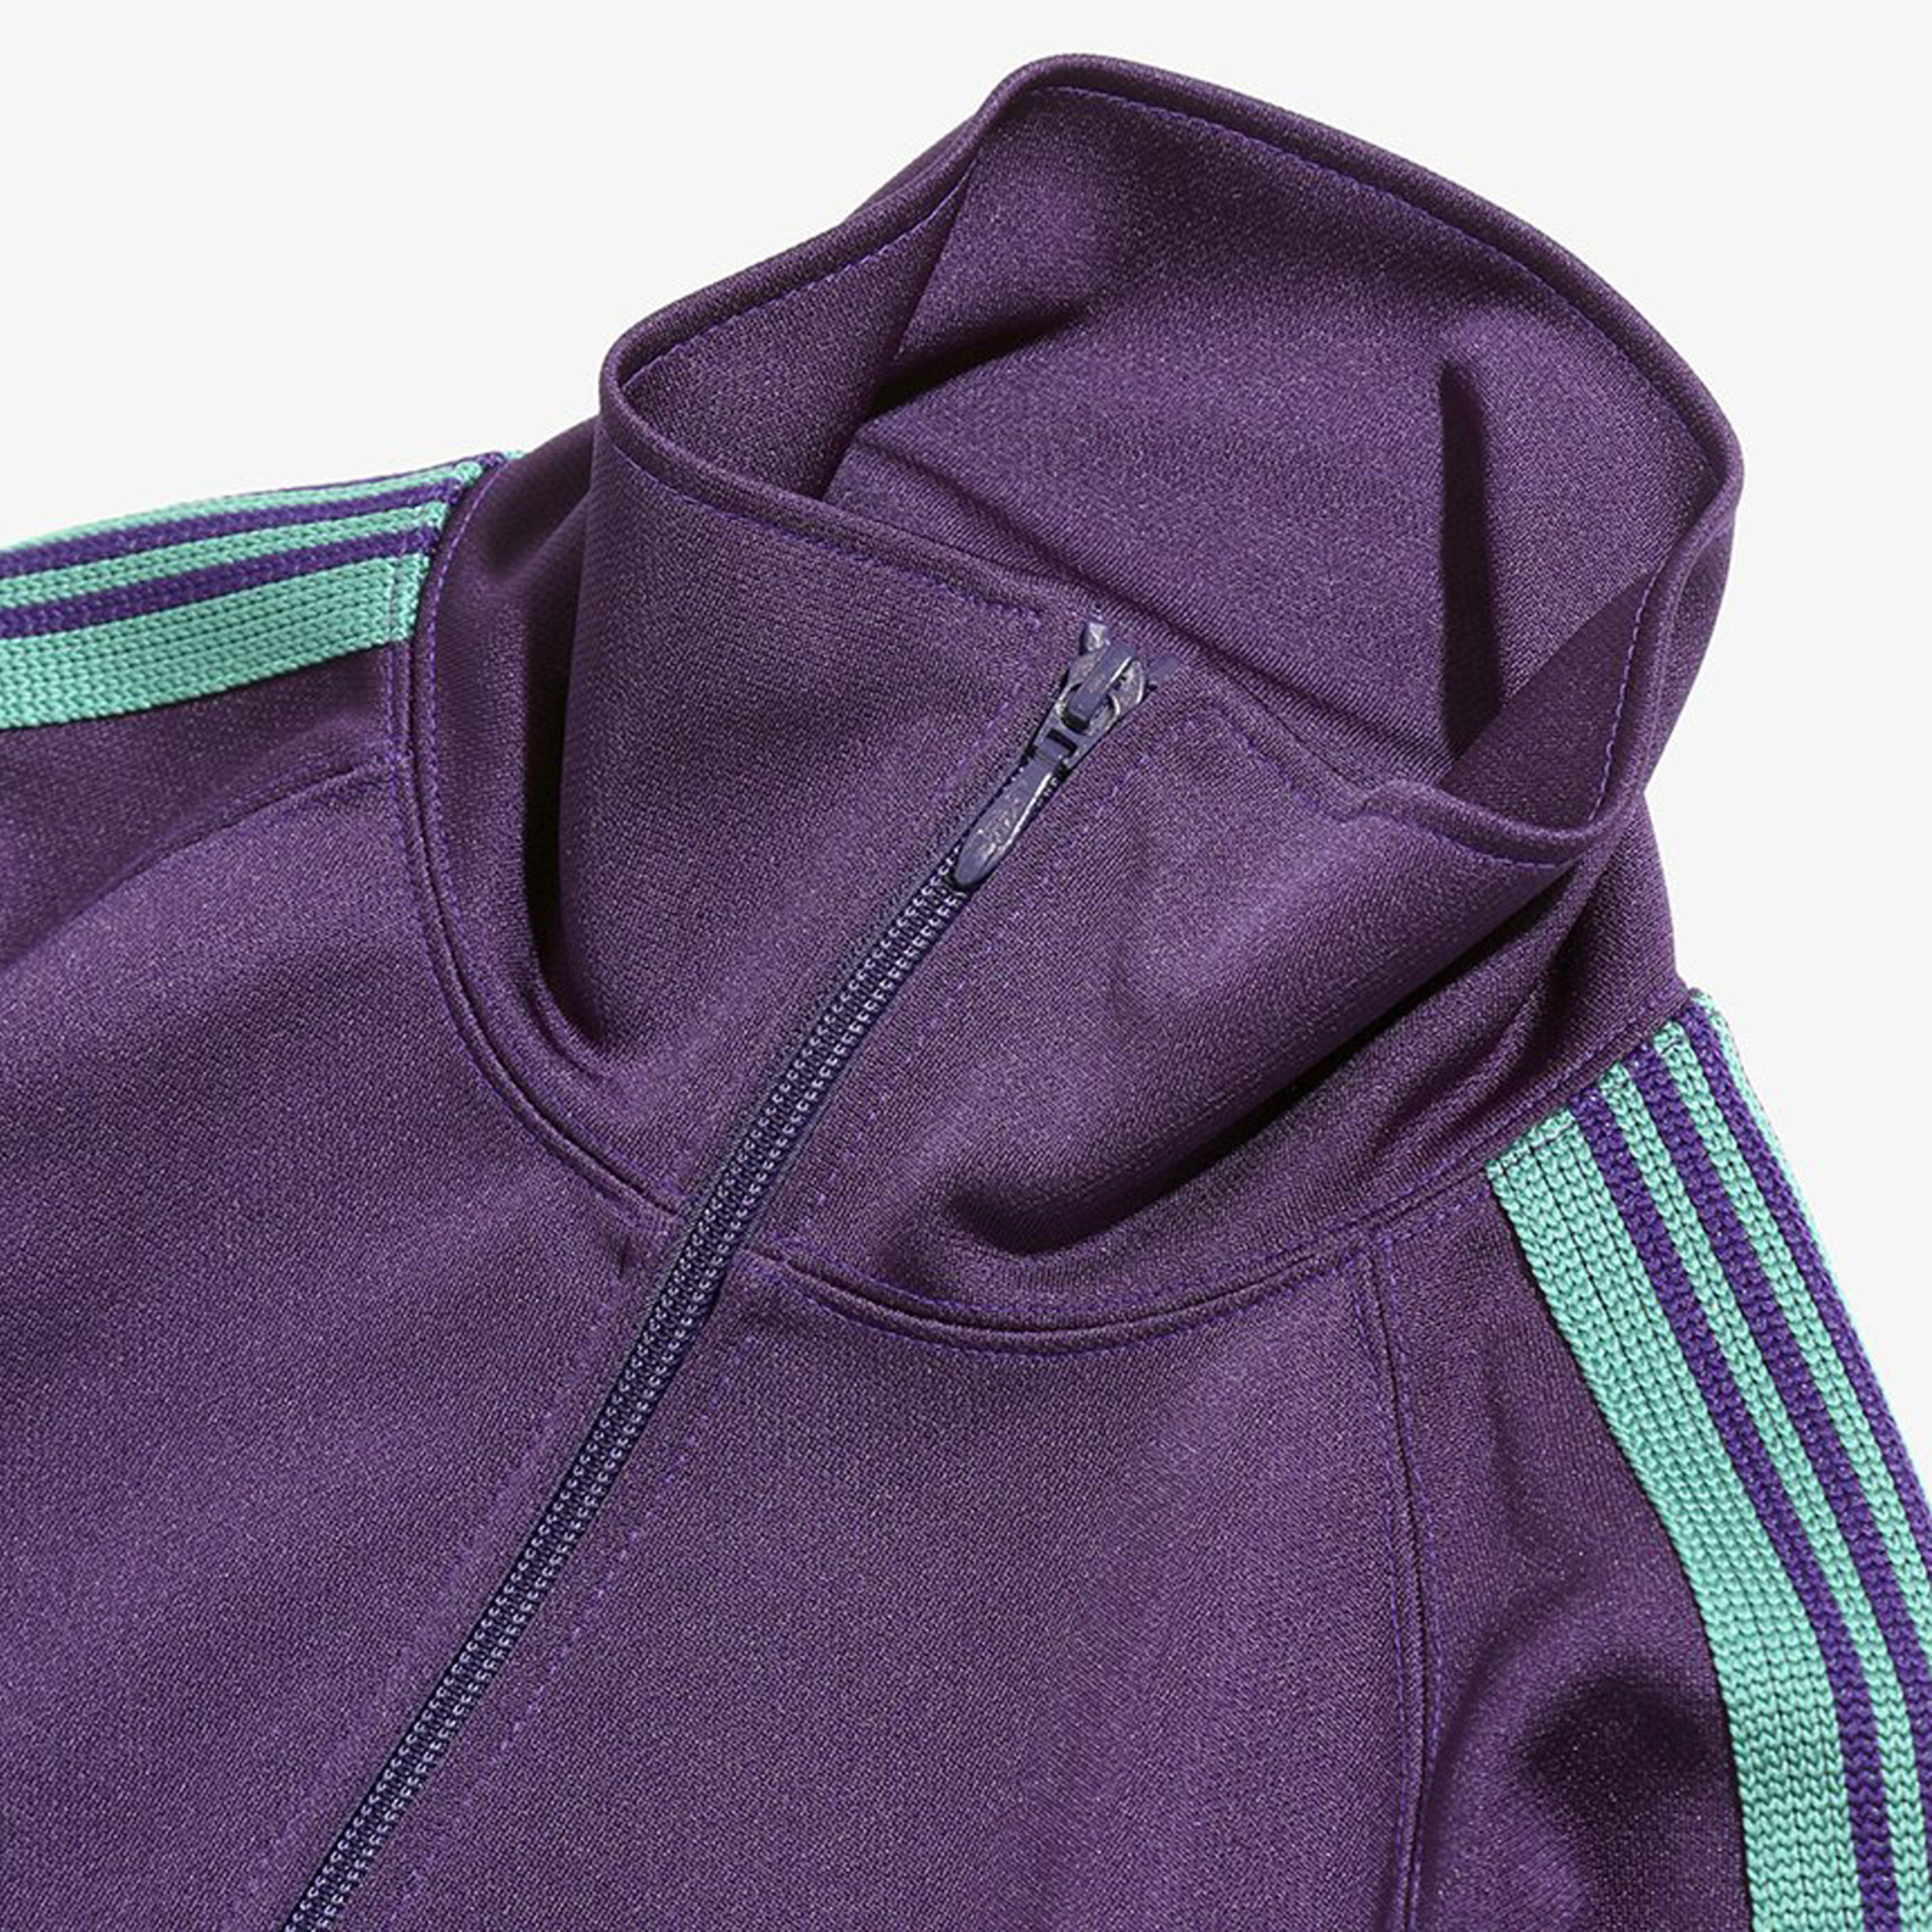 NEEDLES TRACK JACKET-POLY SMOOTH